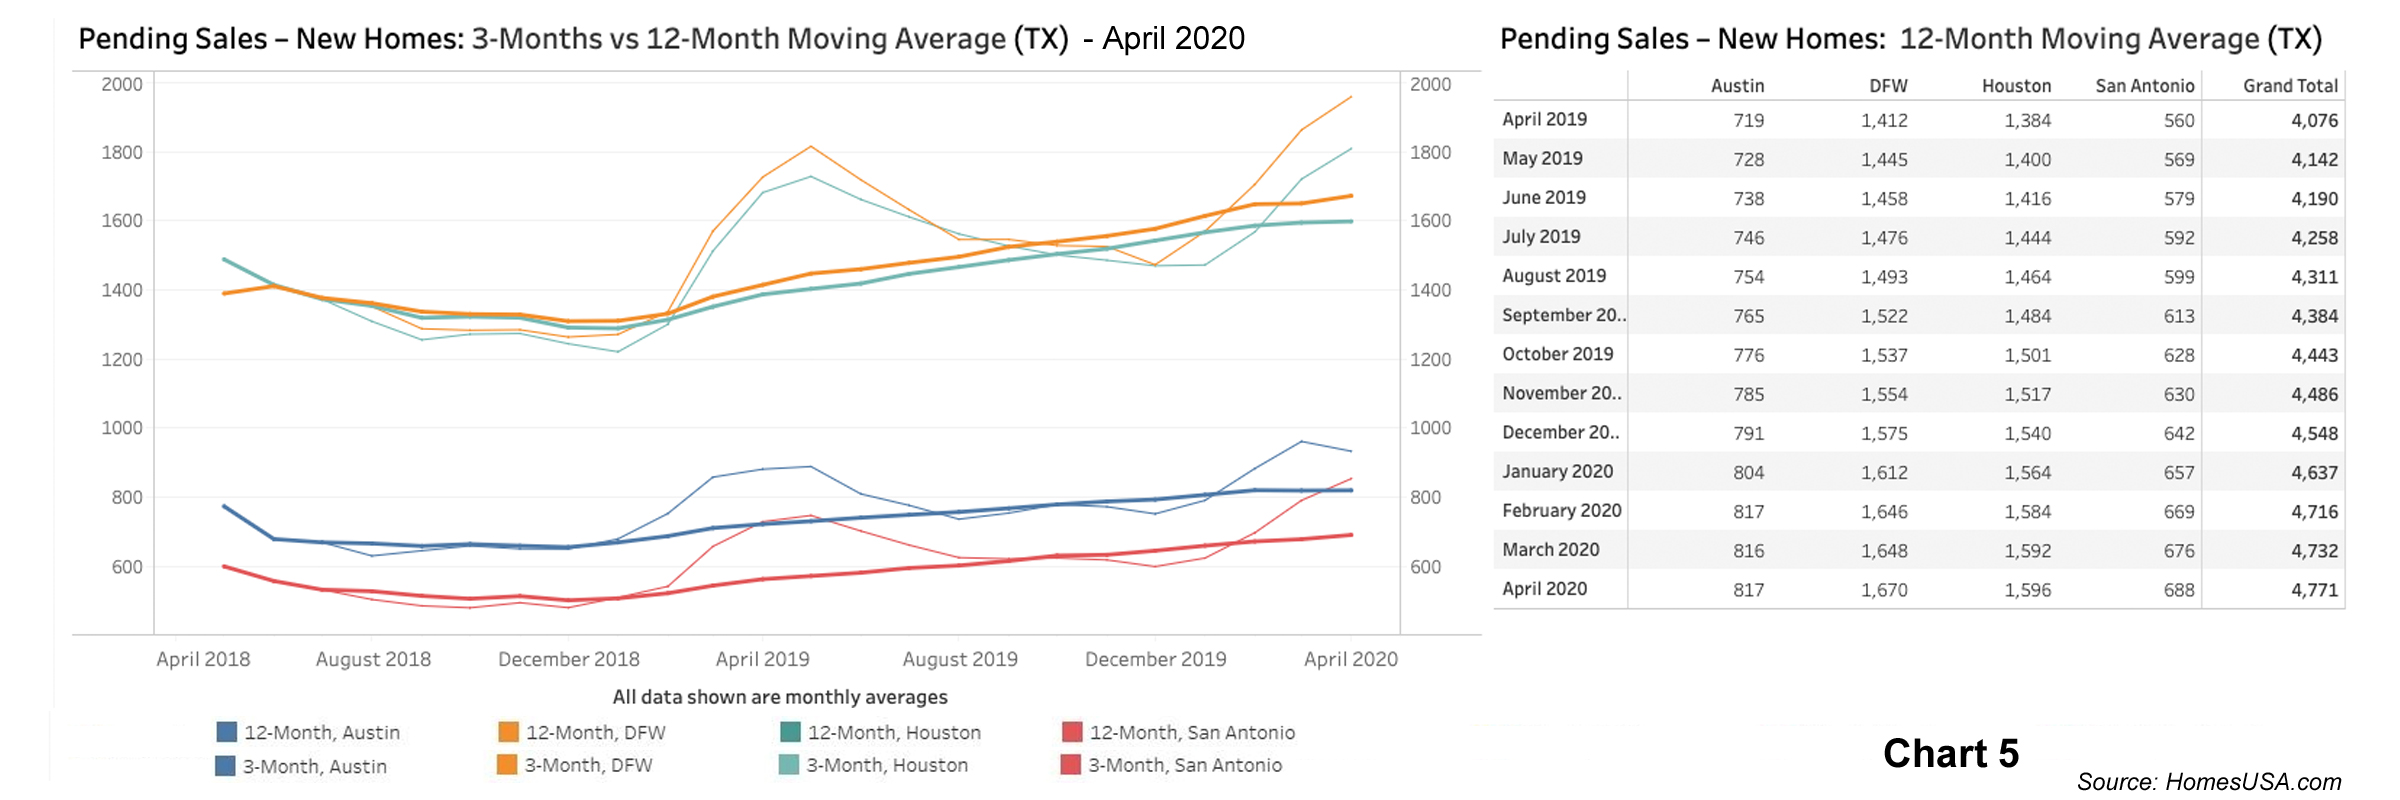 Chart 5: Pending Sales for Texas New Homes - April 2020